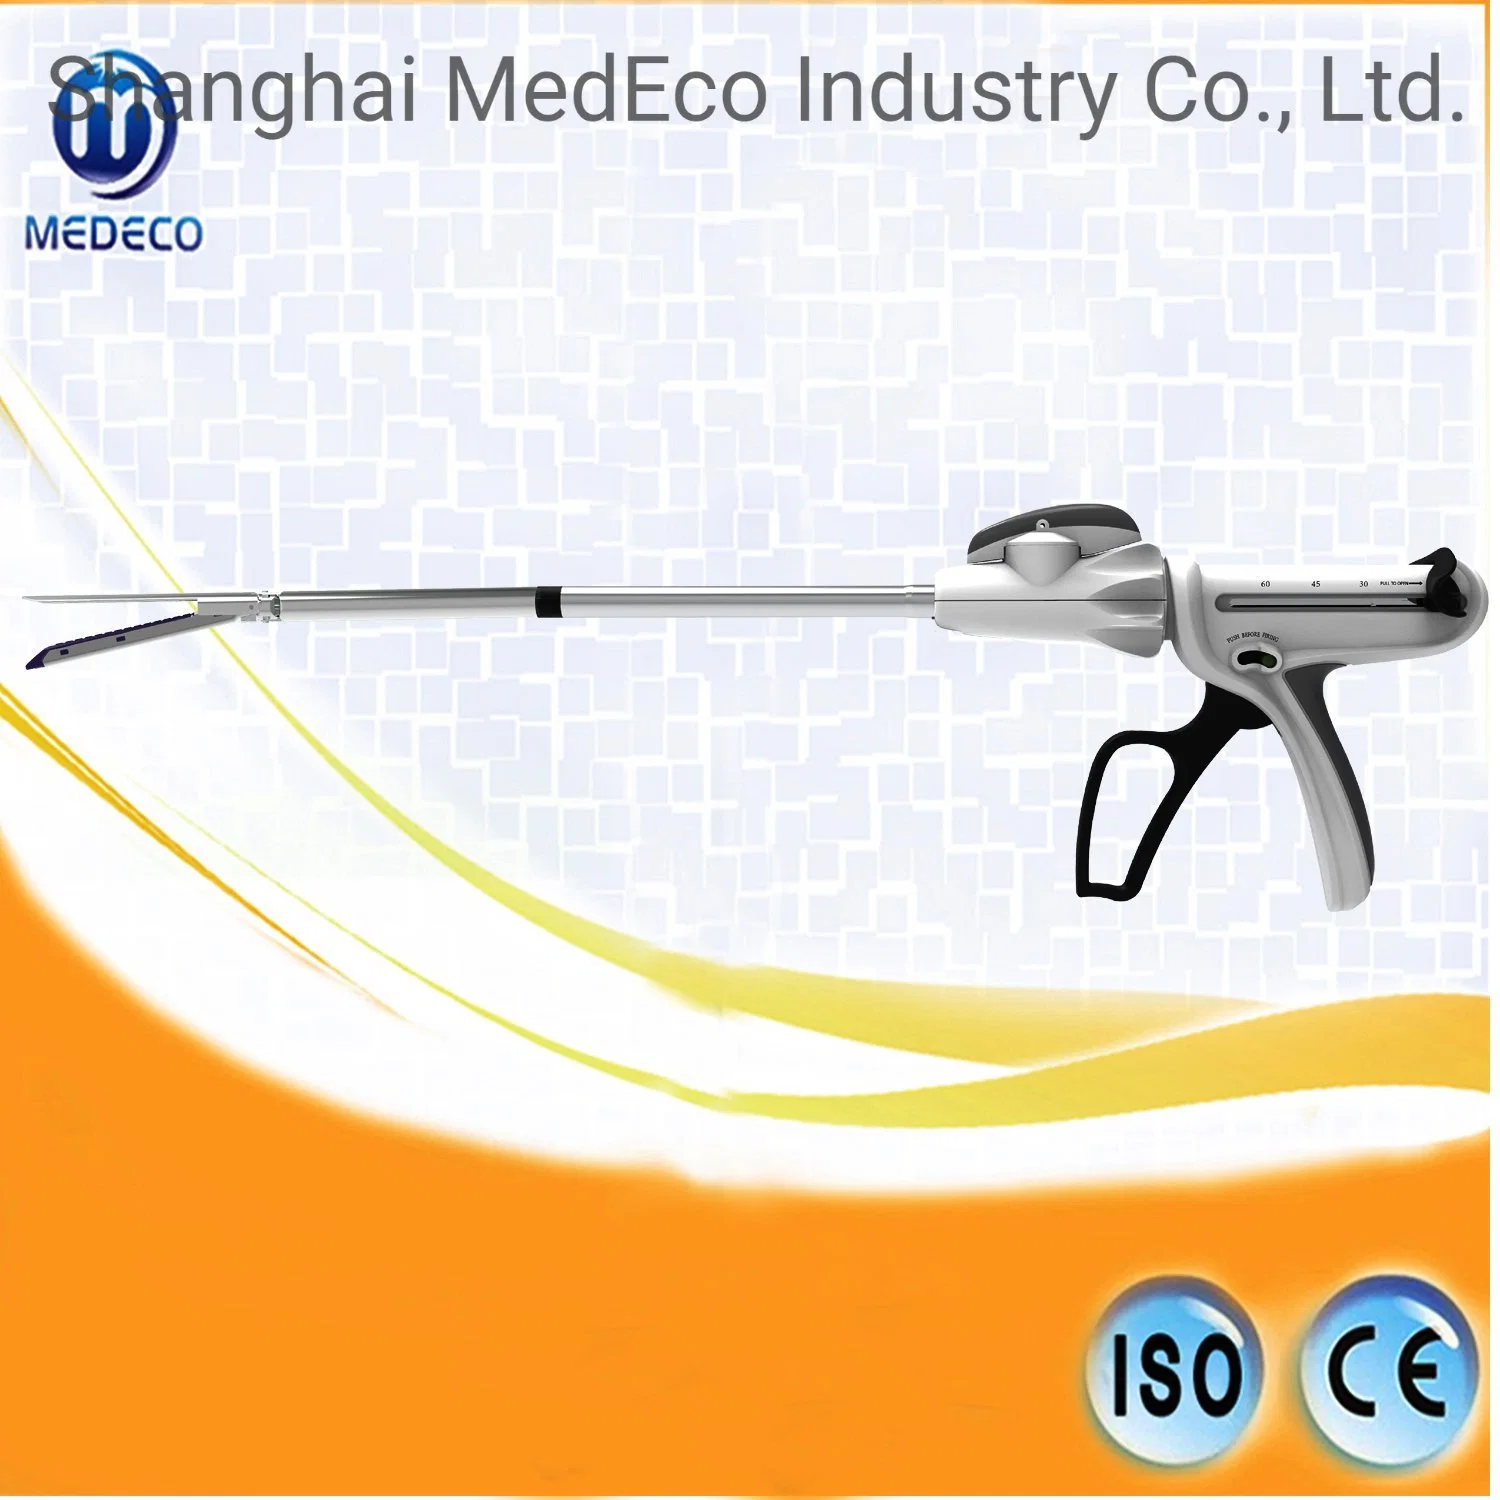 High-Quality Surgical Stapler Best-Selling Endoscopic Cutting Stapler Manufacturers Sell Medical Equipment